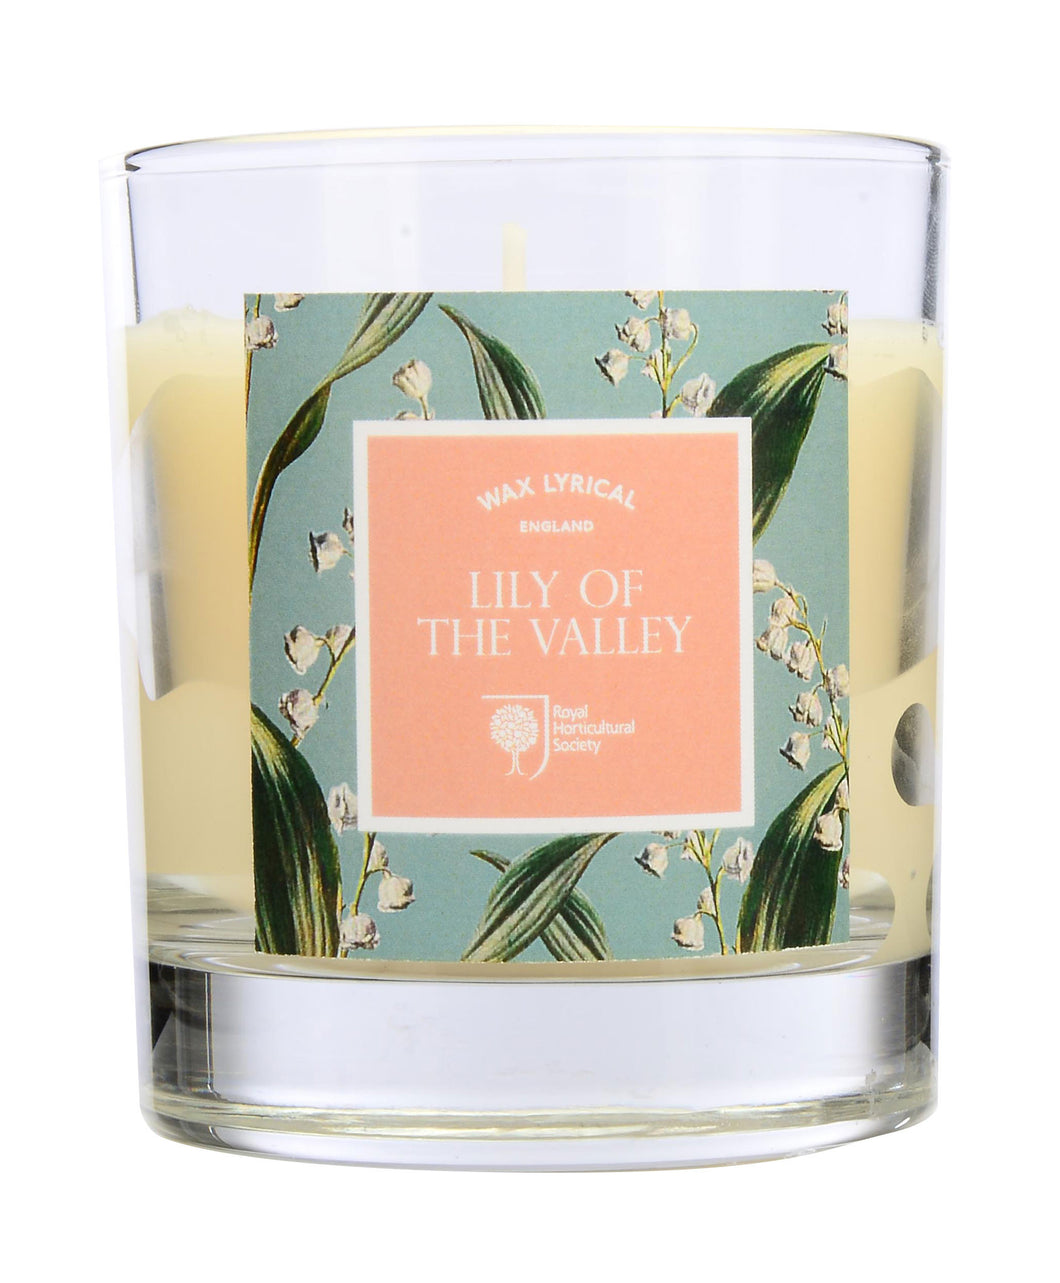 Wax Lyrical RHS Fragrant Garden Fragranced Candle Lily of the Valley - LAST FEW AVAILABLE!